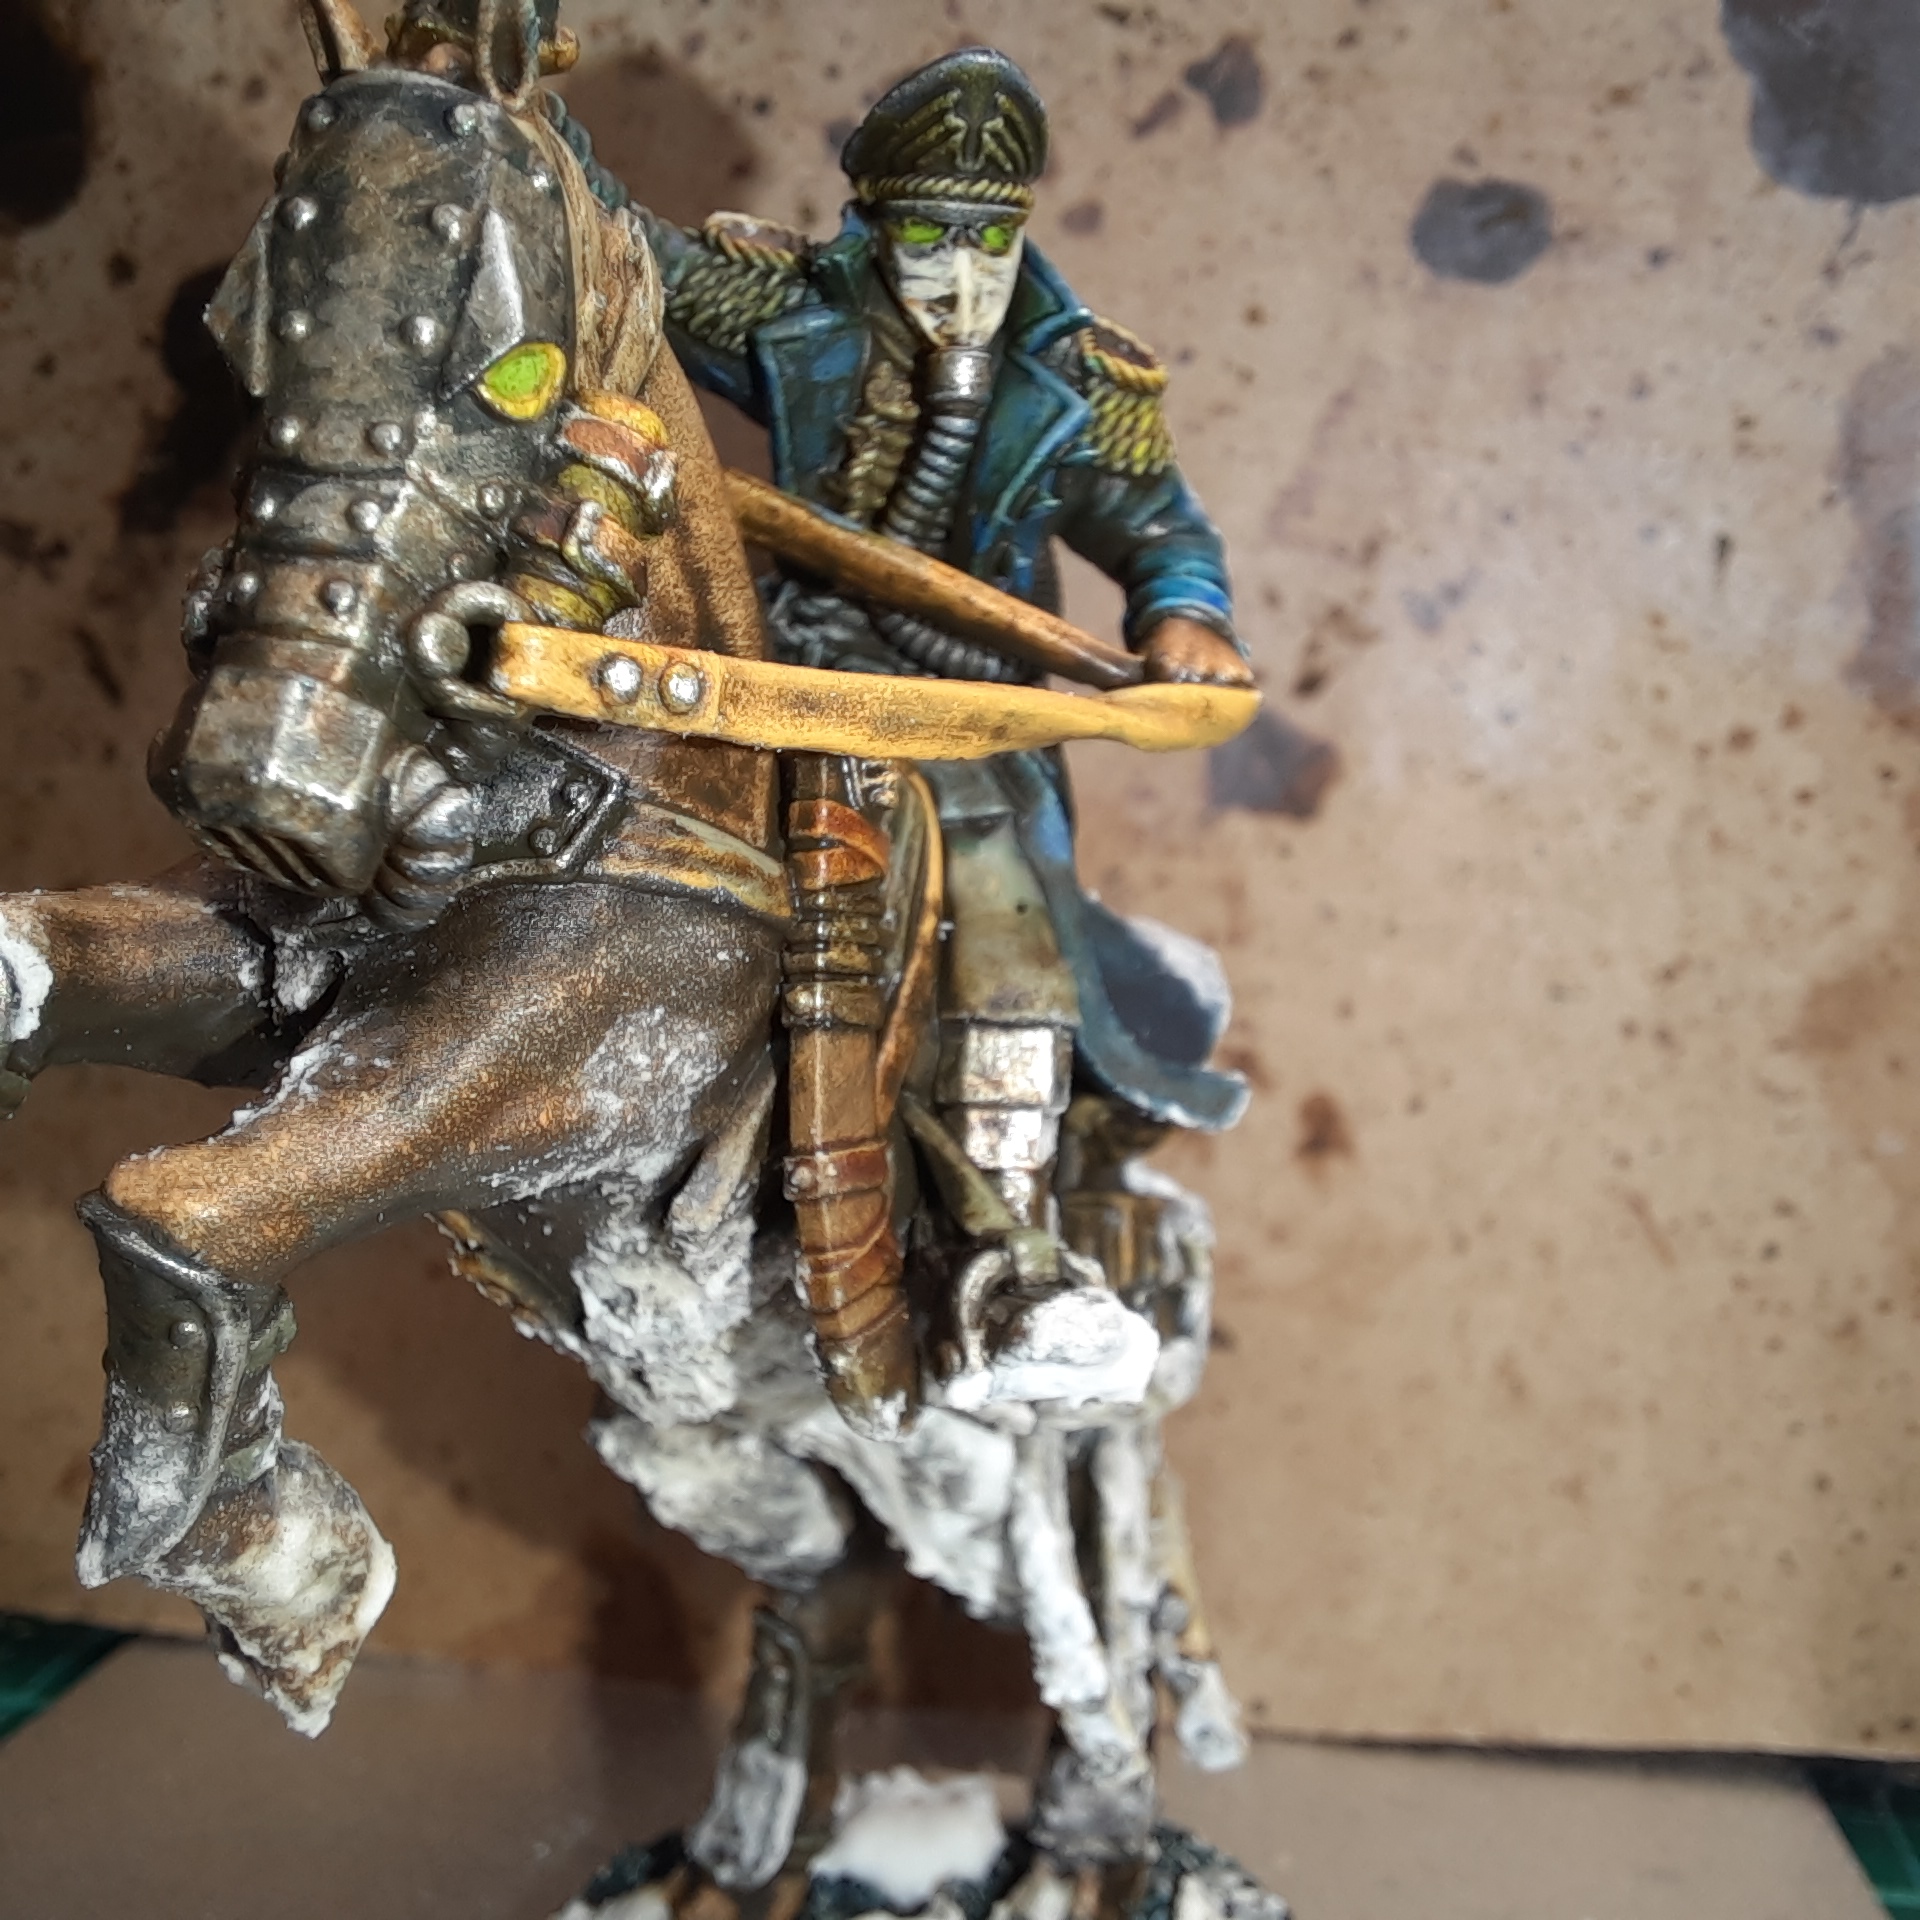 3D Printed Guardsman #2 by wrusher